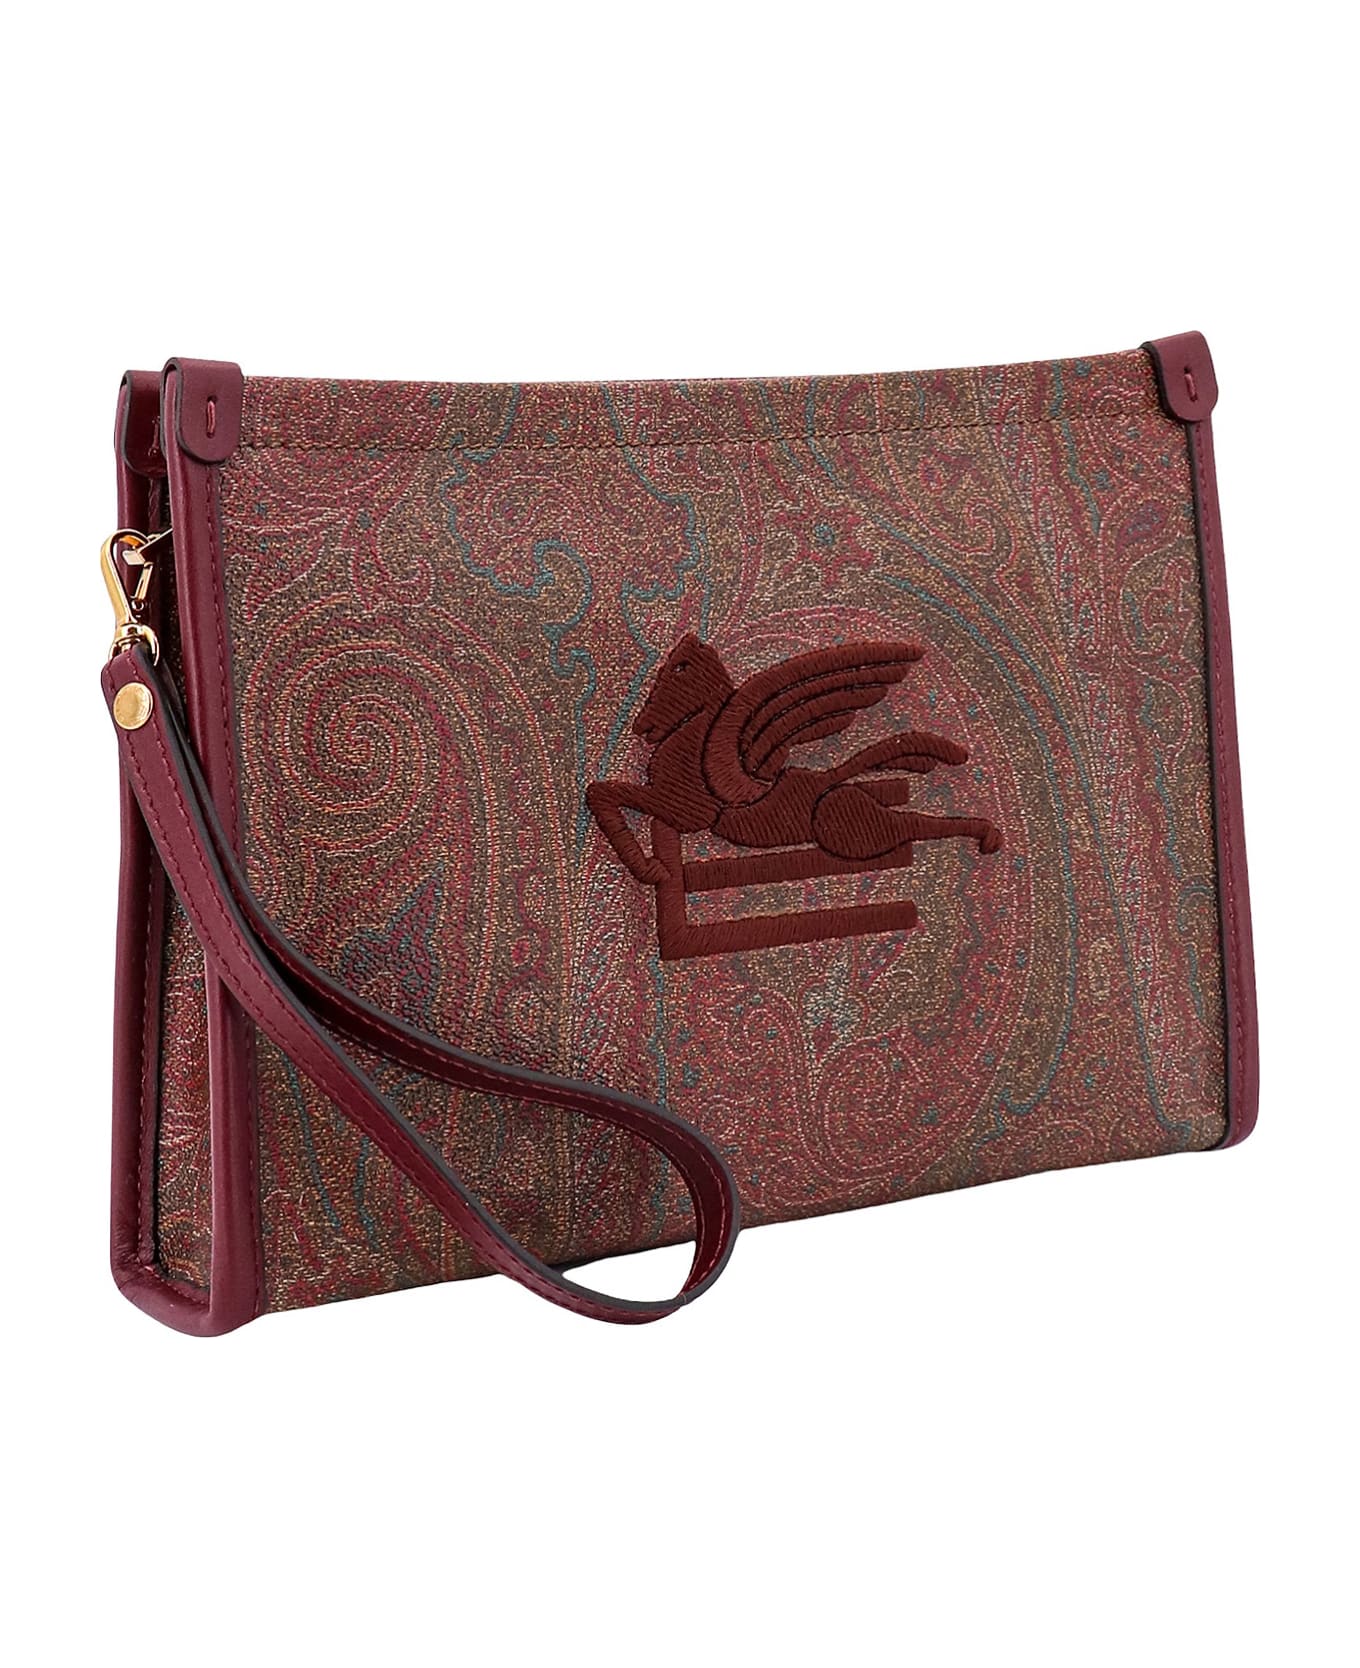 Etro Printed Fabric Pouch - Brown